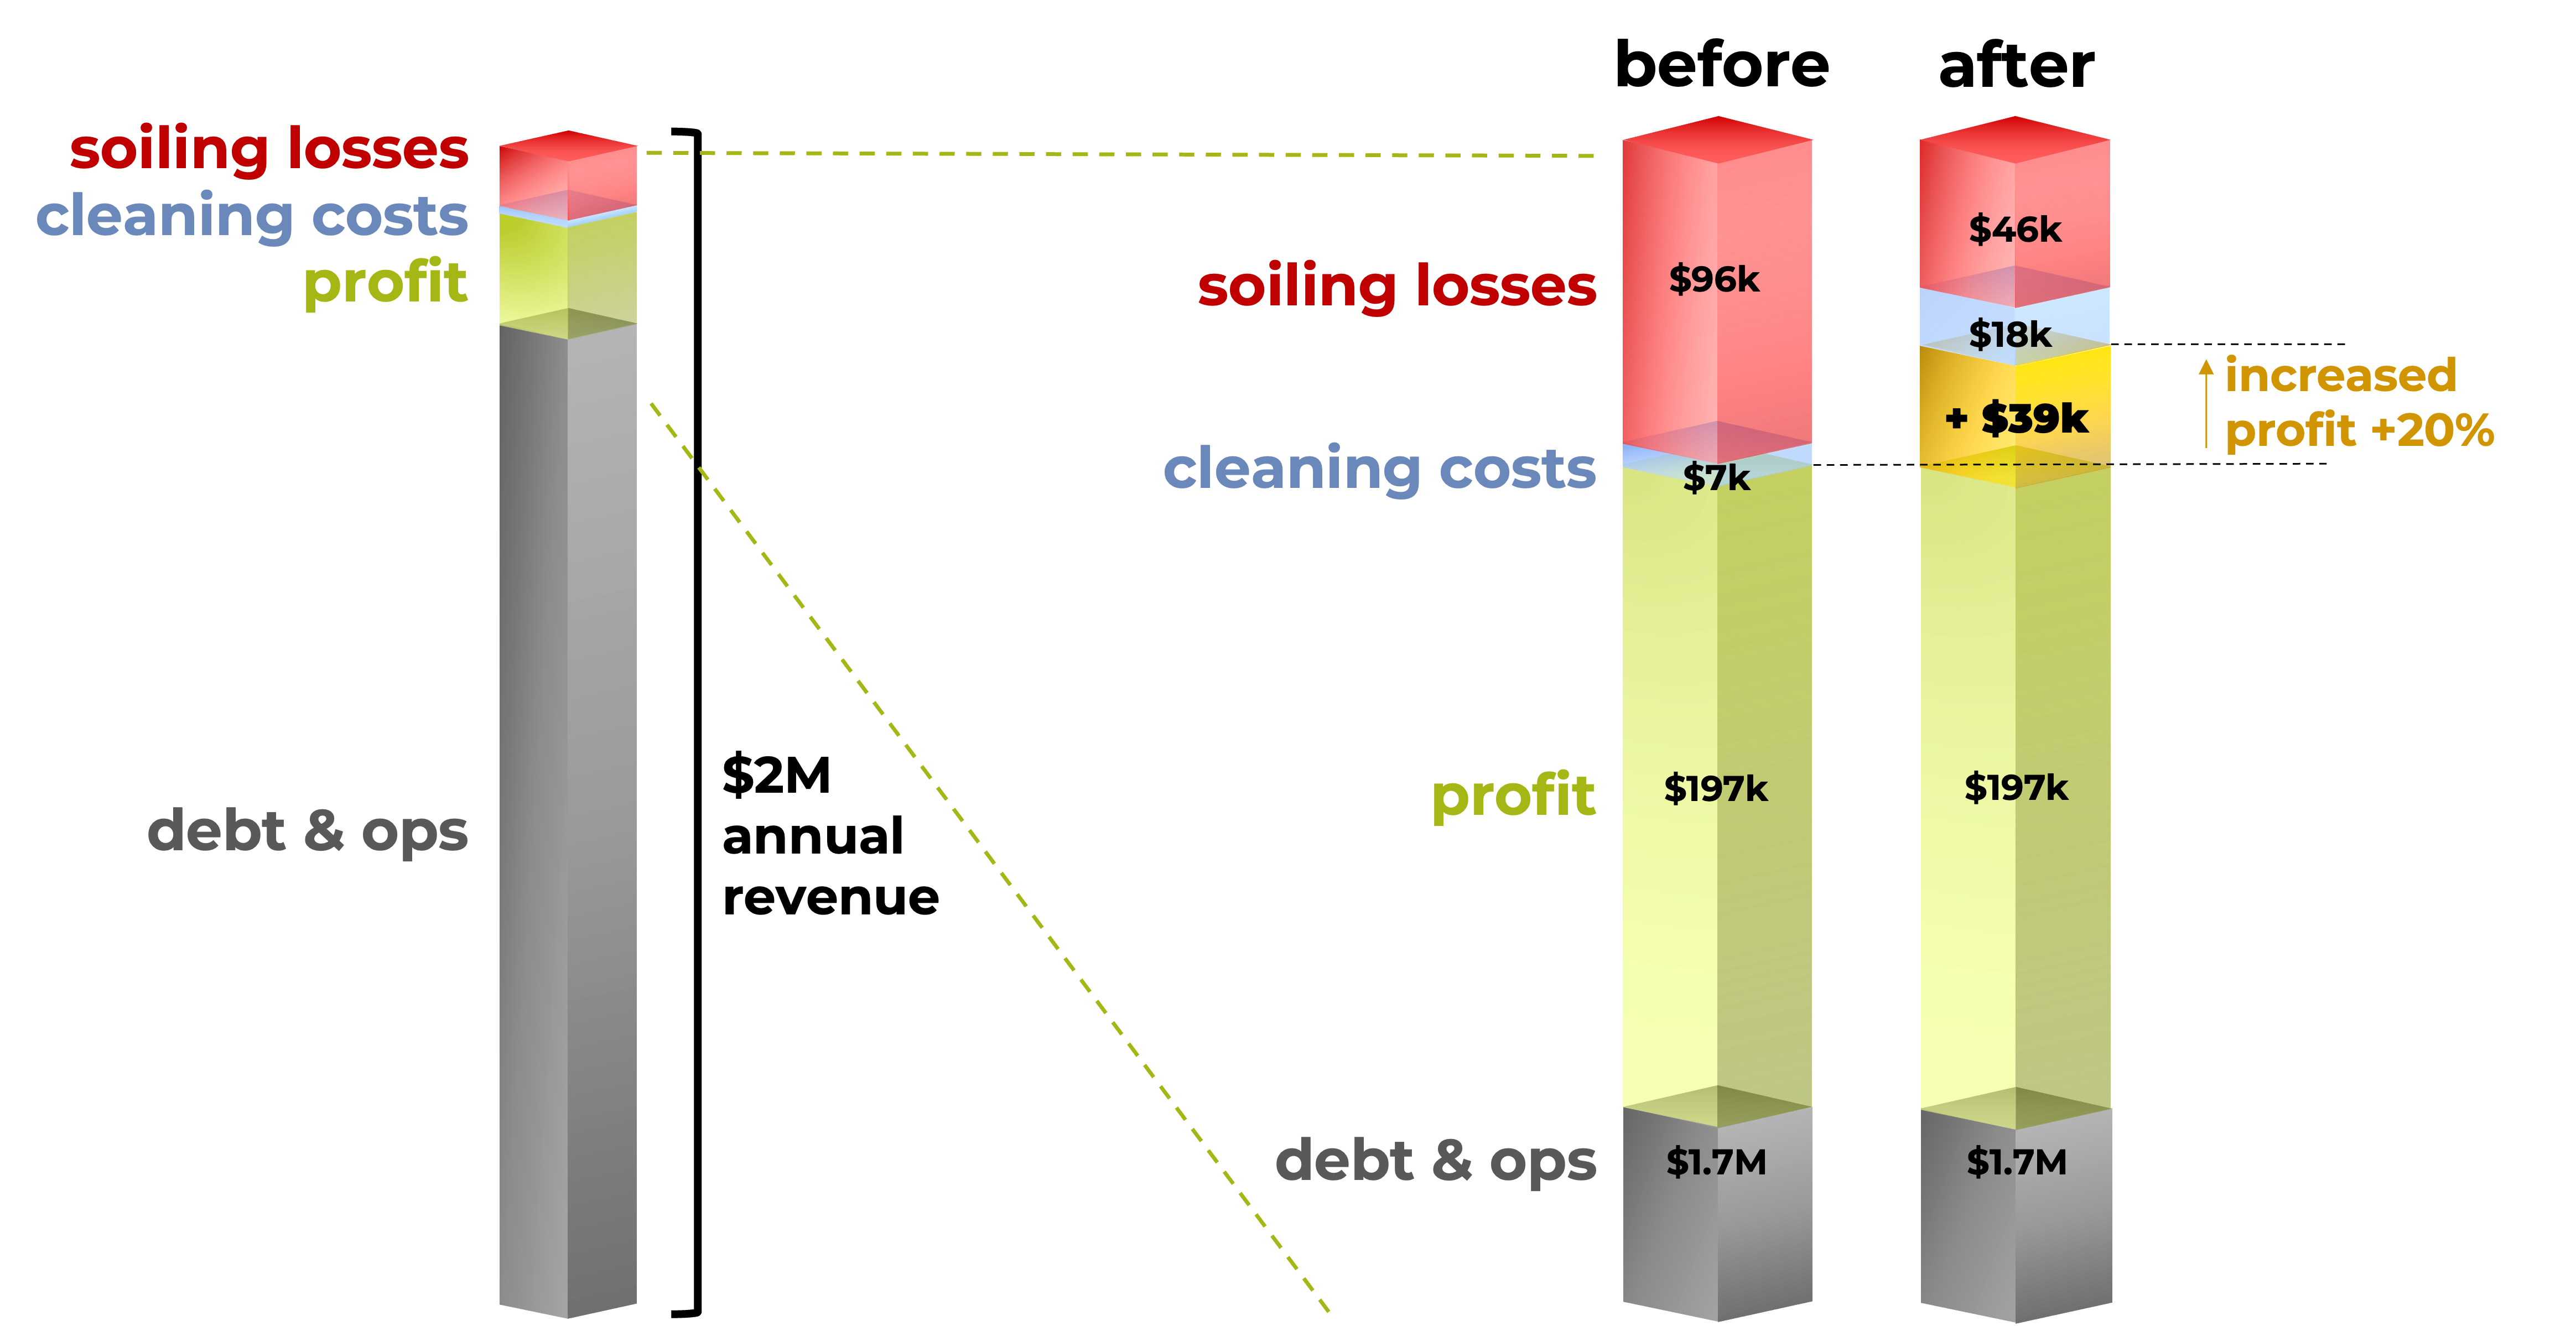 Solar Unsoiled Optimized Cleanings Increase Profit for Solar